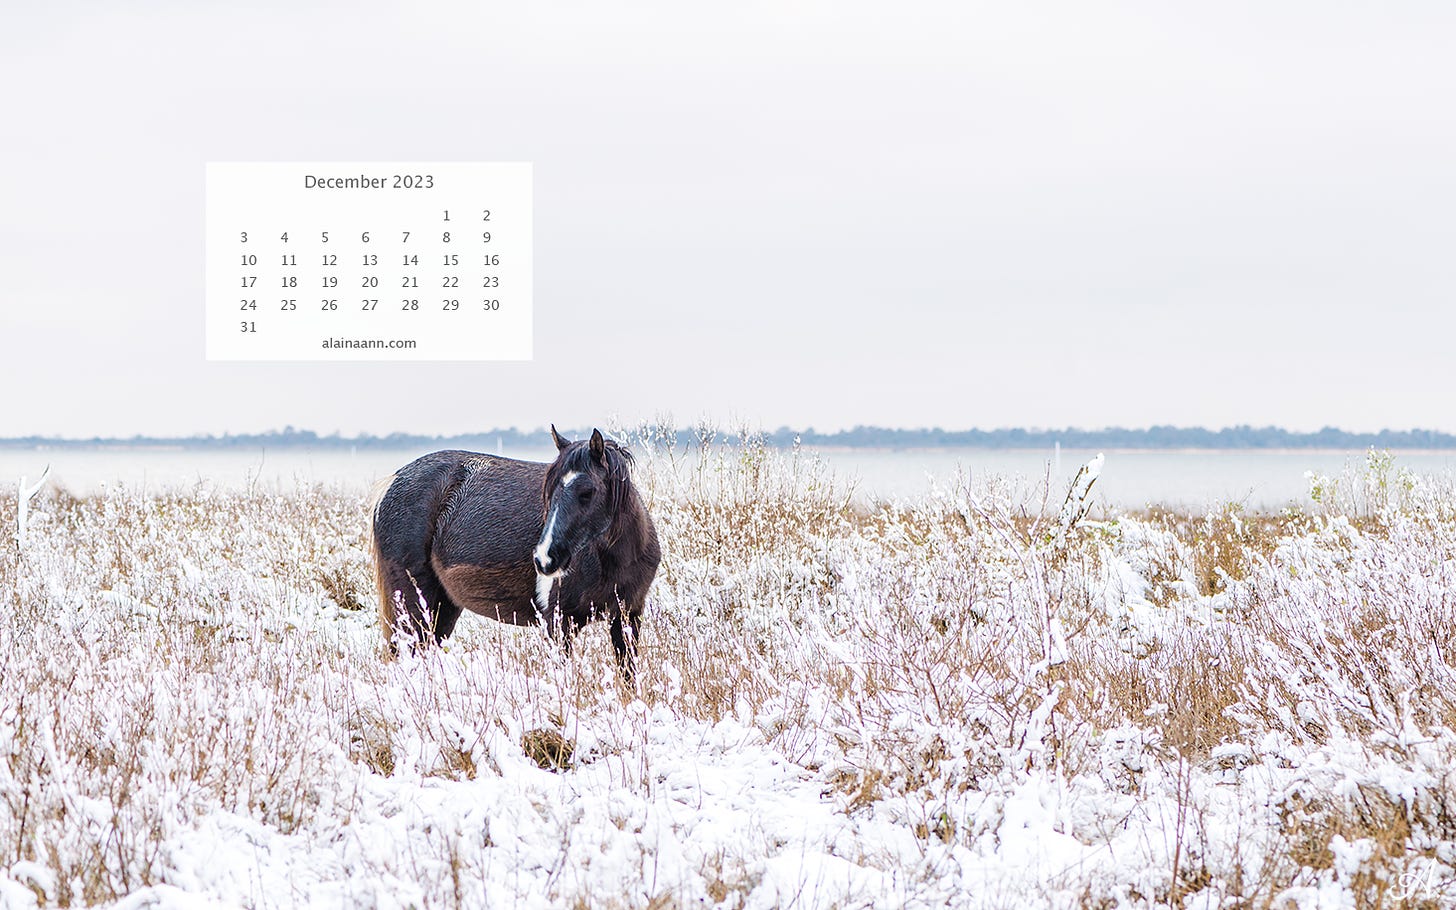 Close-up of a black and brown horse with a white nose, surrounded by tall grass covered in snow. A calendar for the month of December is in the upper left corner of the image.